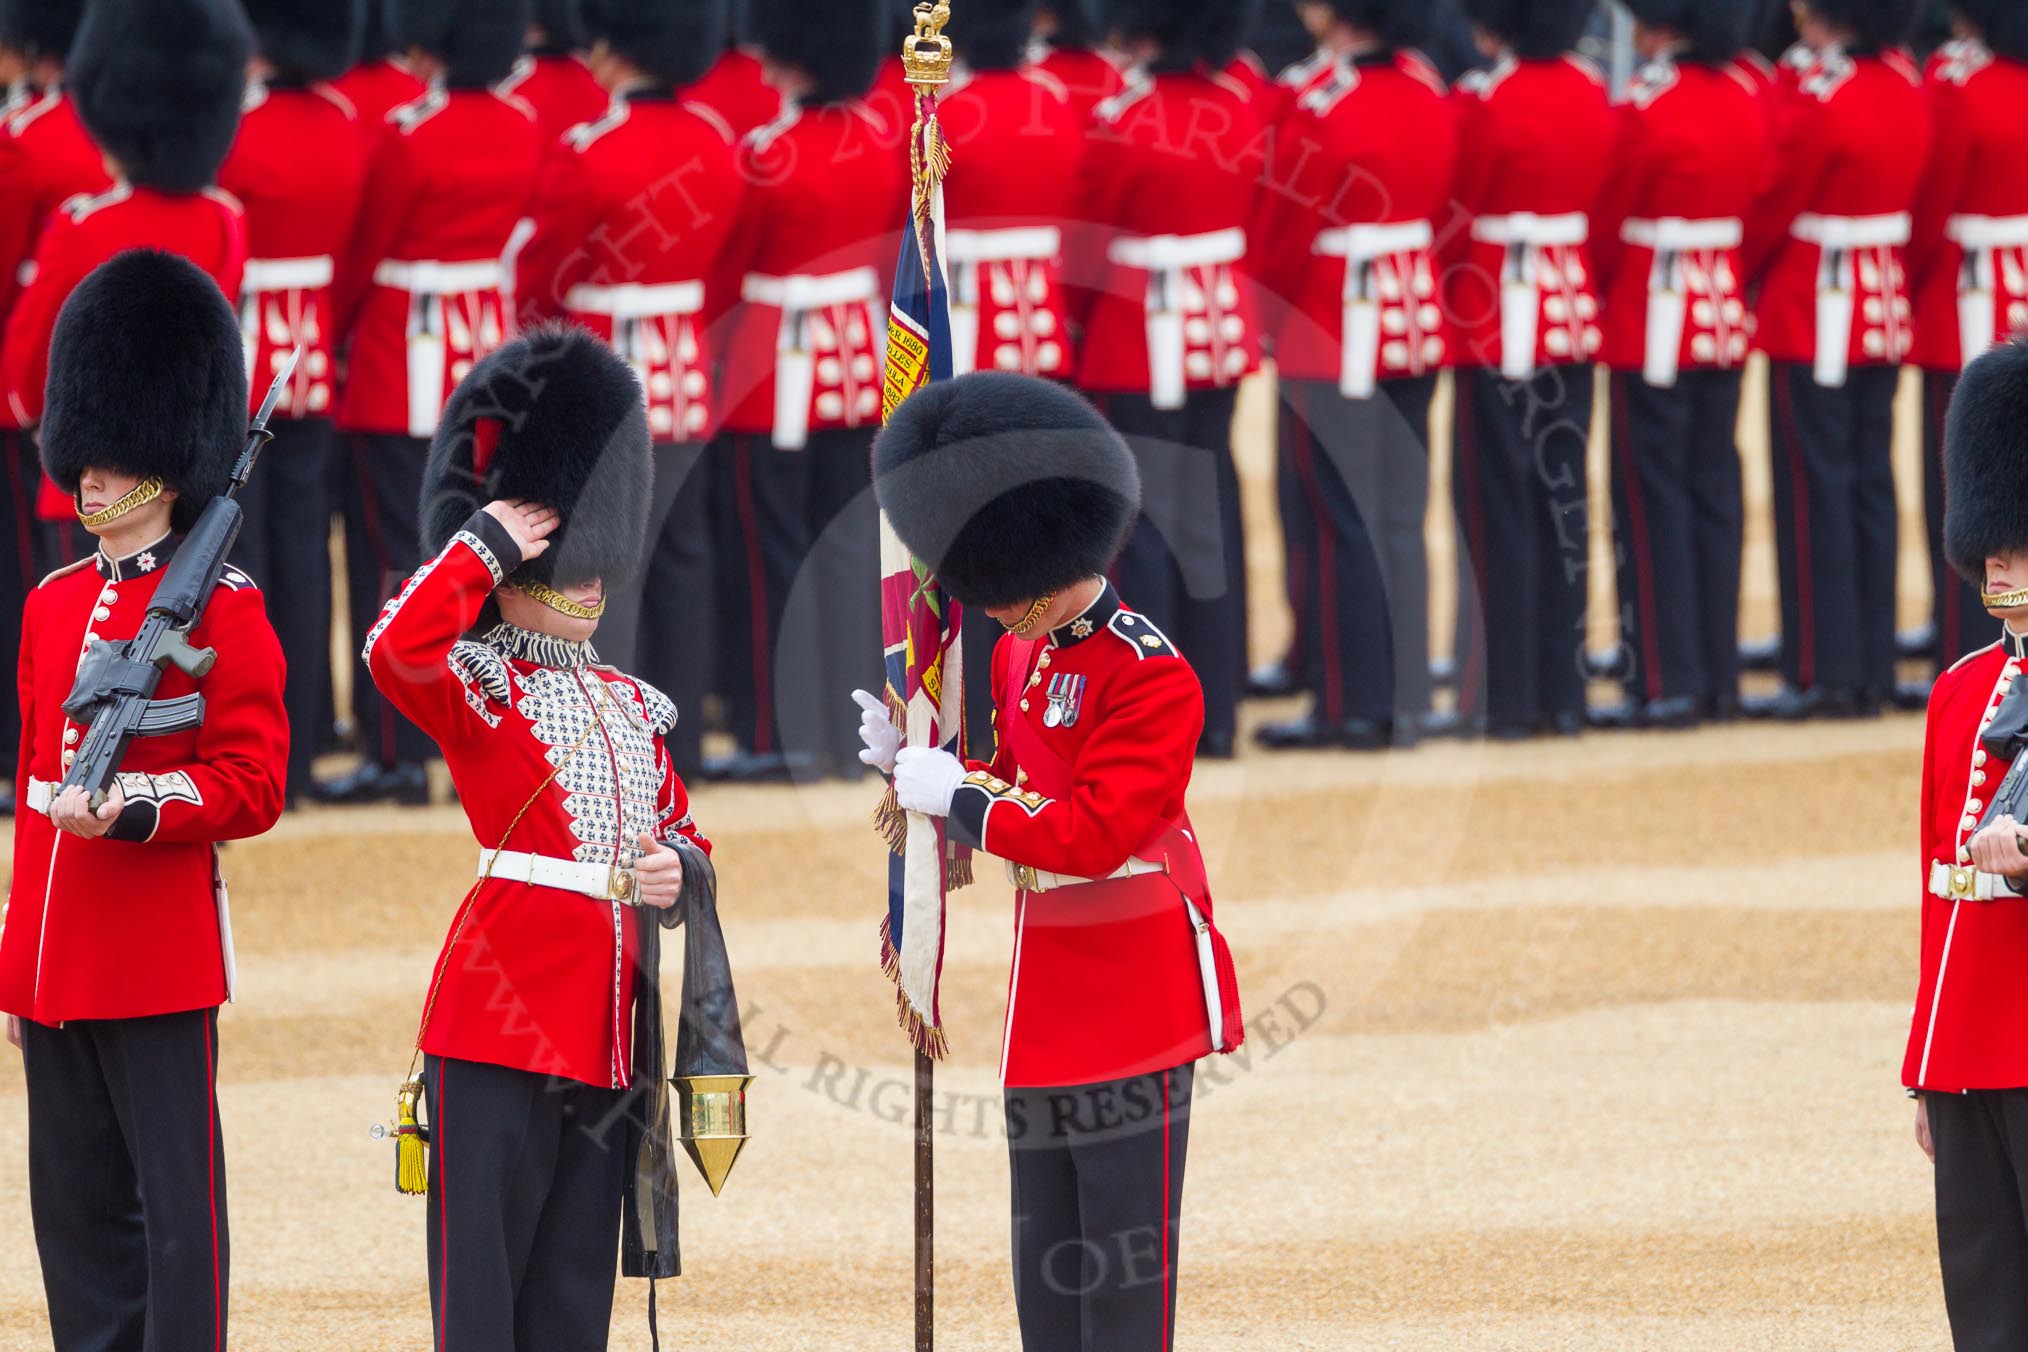 The Colonel's Review 2016.
Horse Guards Parade, Westminster,
London,

United Kingdom,
on 04 June 2016 at 10:35, image #97